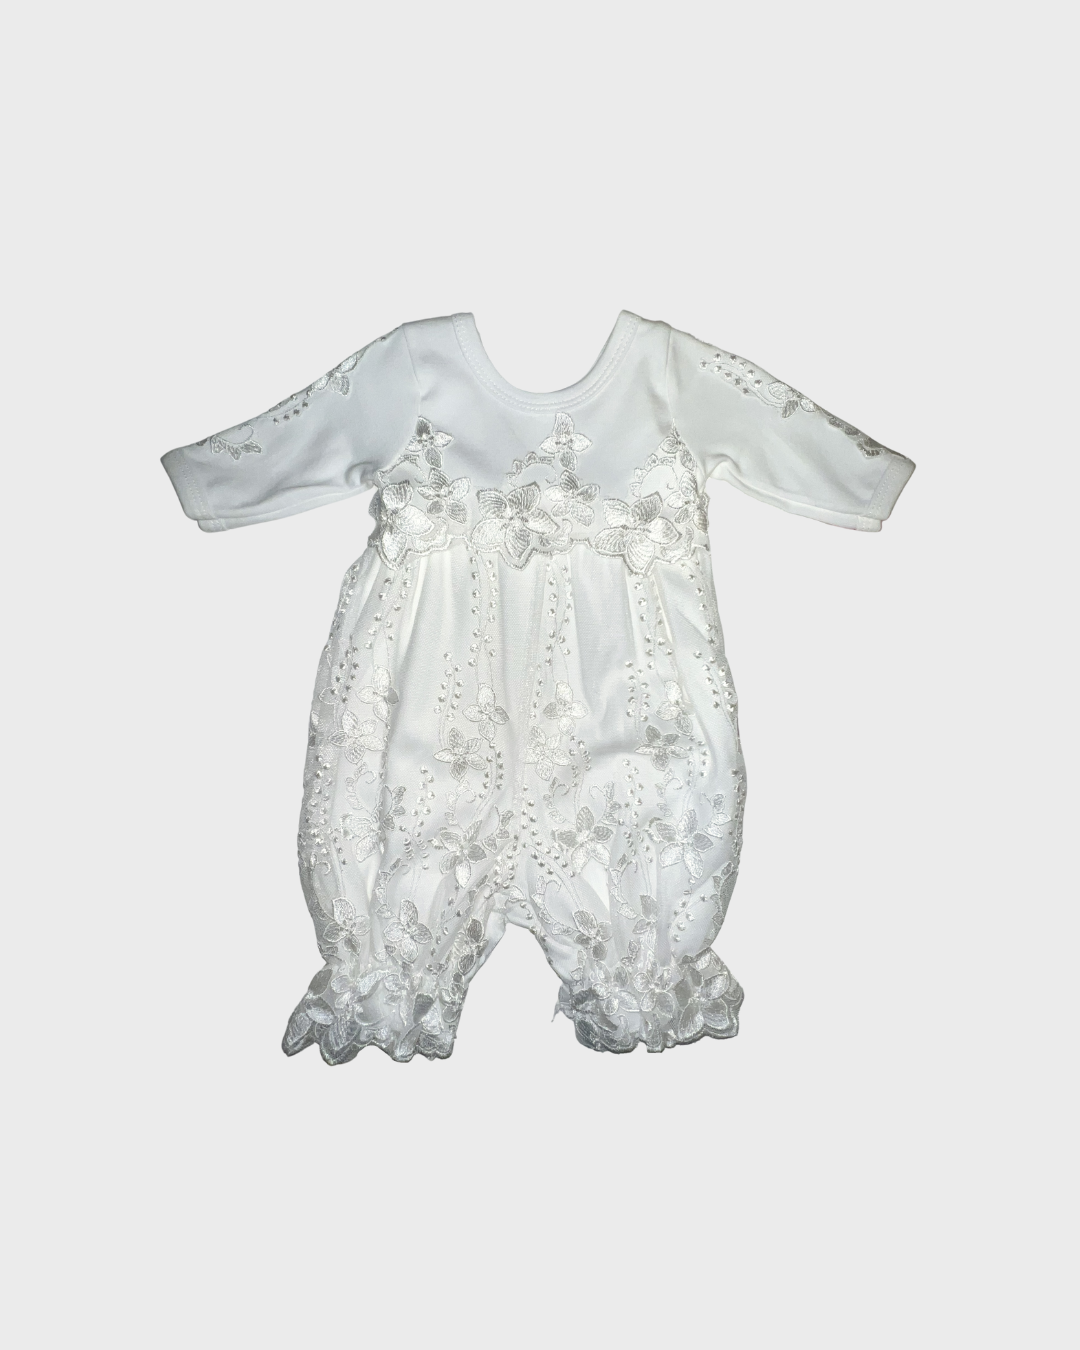 Ivory Romper with Lace Overlay